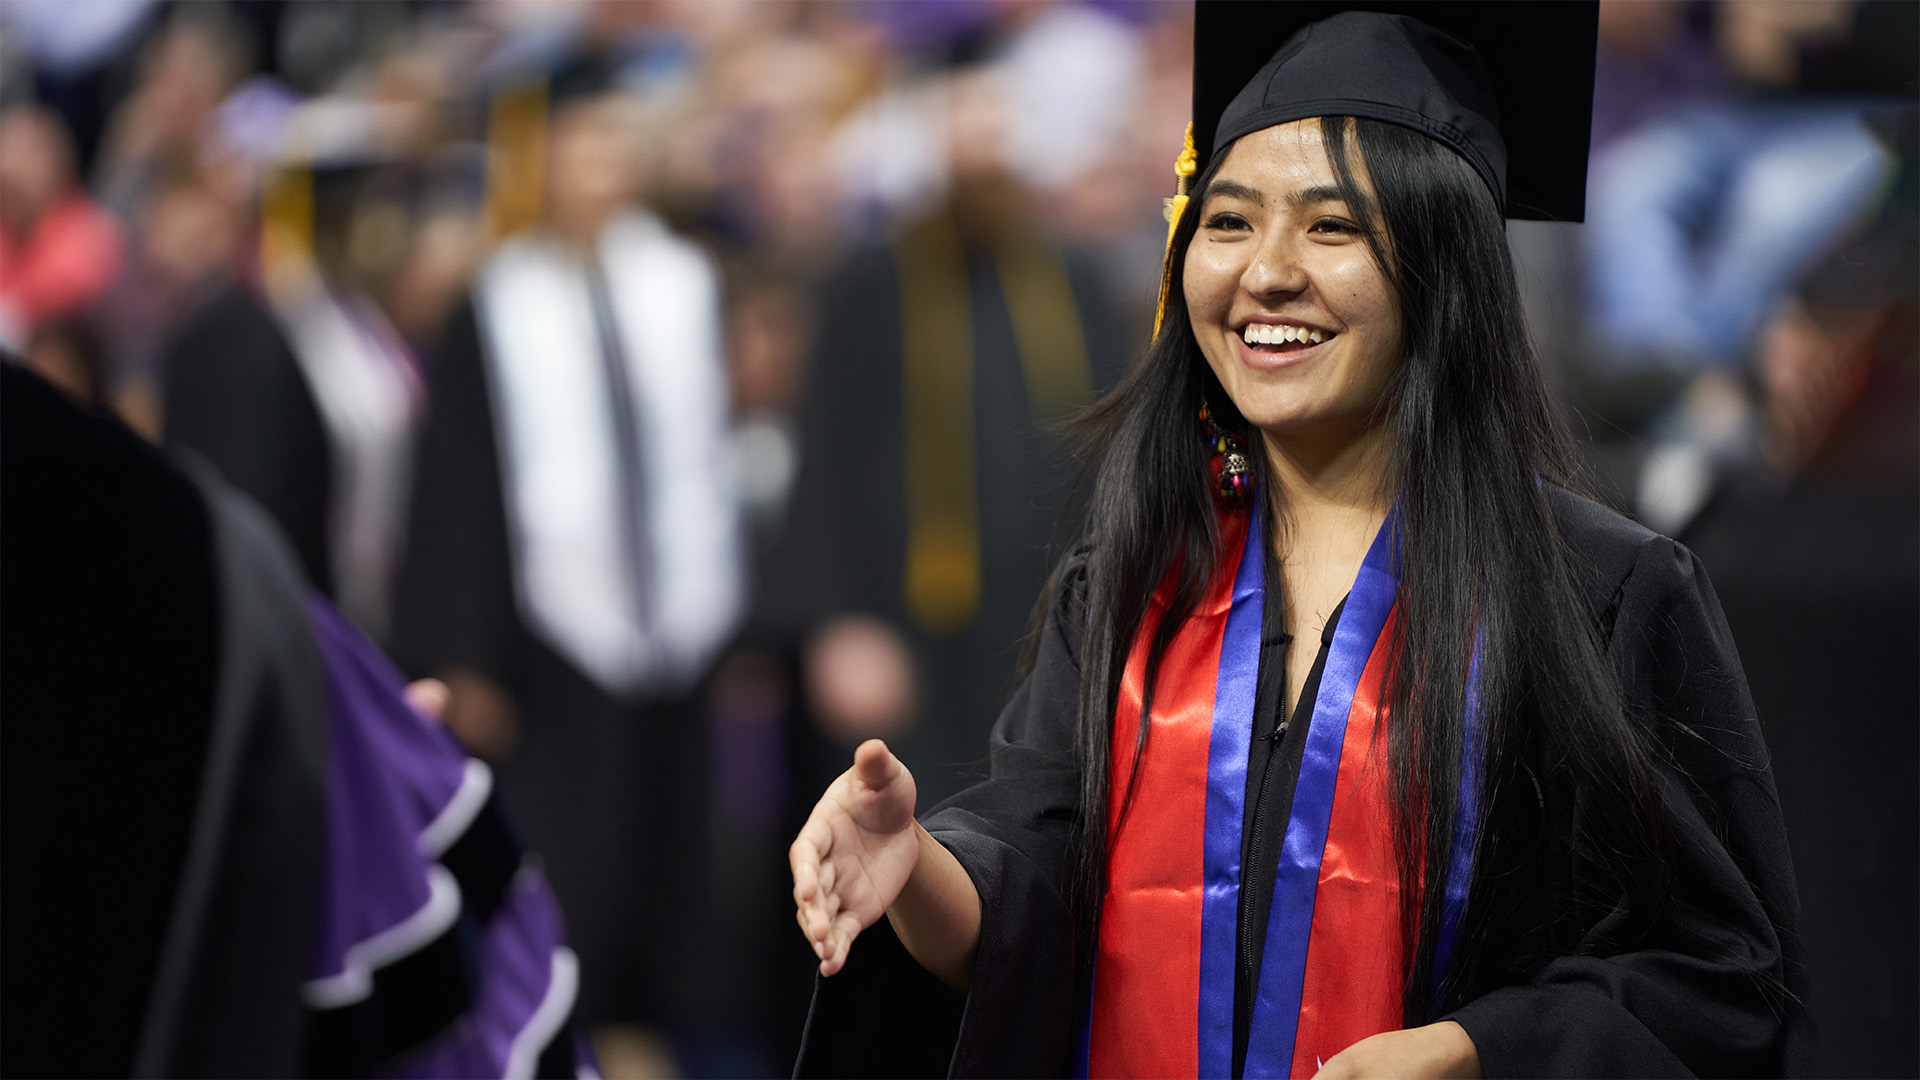 UE graduate shaking hand at commencement